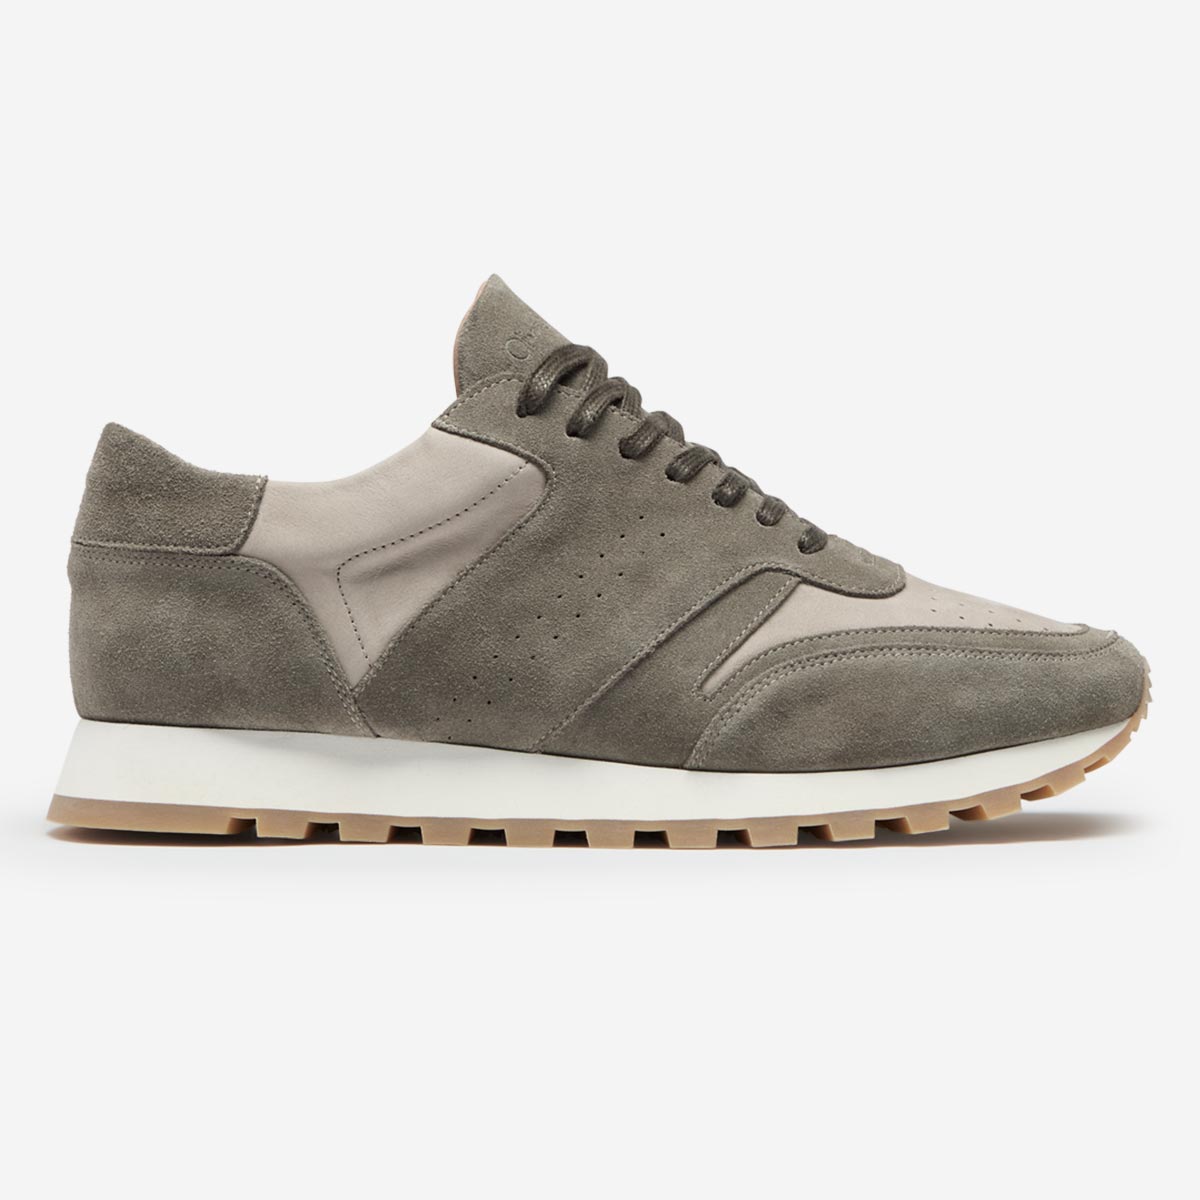 Orjais Khaki Suede Trainers | Men's Trainers | Oliver Sweeney